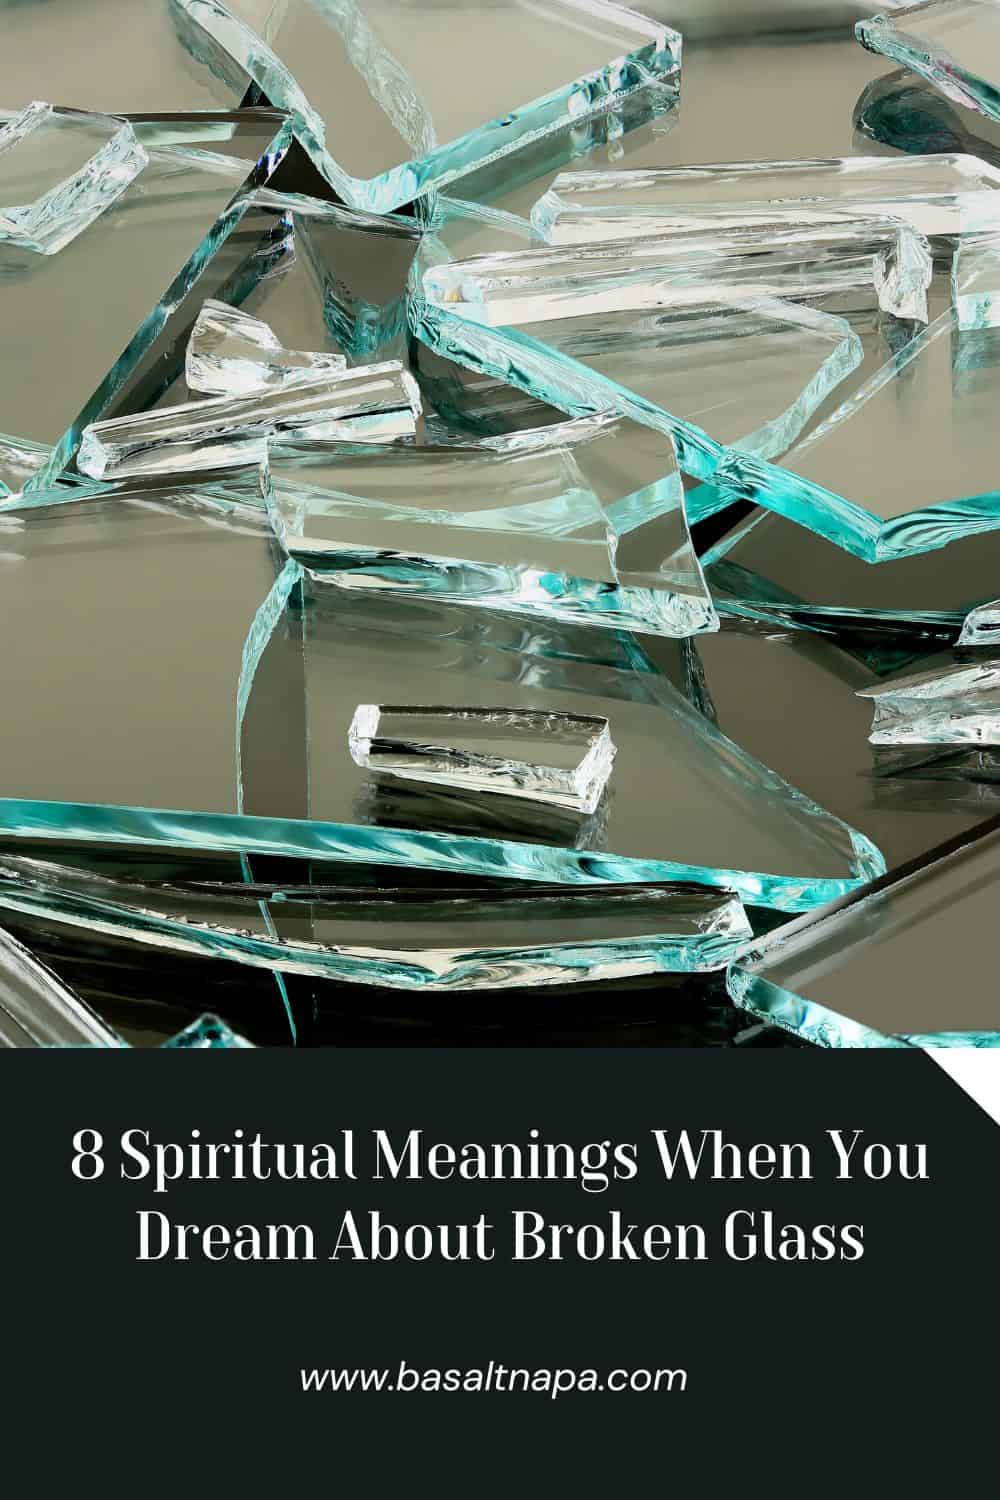 8 Spiritual Meanings When You Dream About Broken Glass